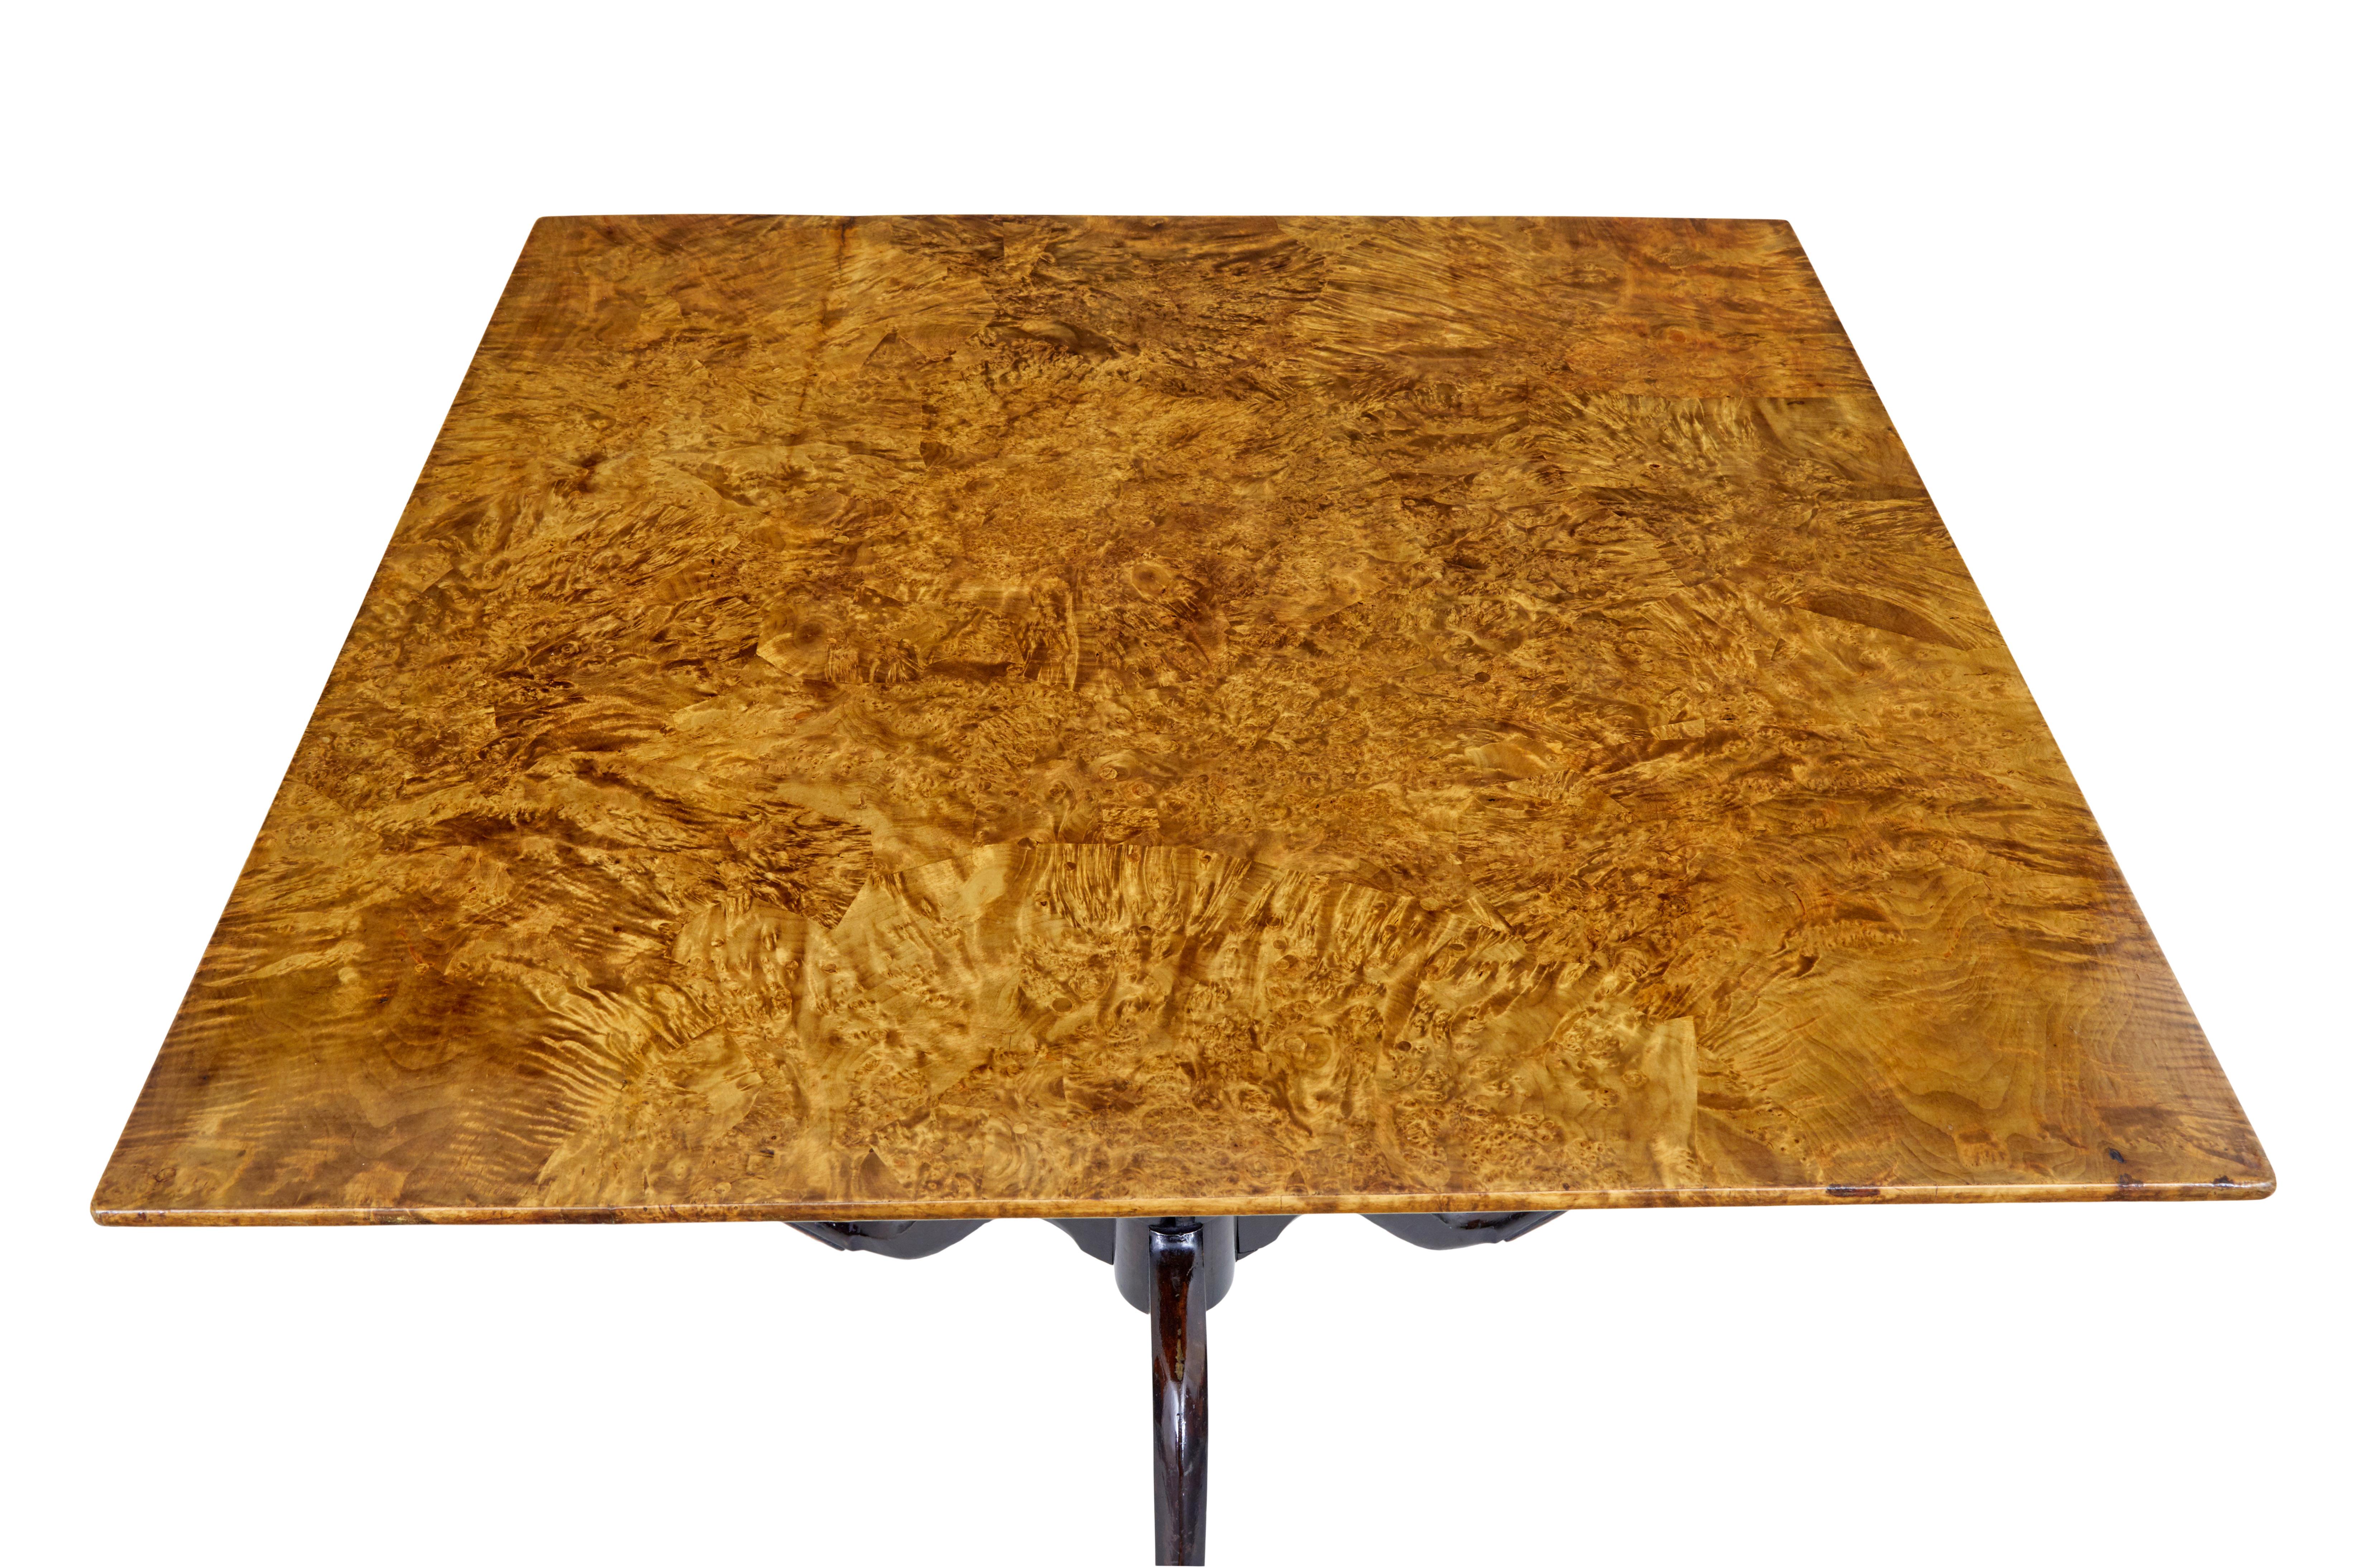 19th century Swedish alder root square tilt top table, circa 1860.

Good quality piece of mid 19th century Swedish furniture, using alder root veneers to make a near square top surface.

Tilting top stands on a stained turned birch tripod base.